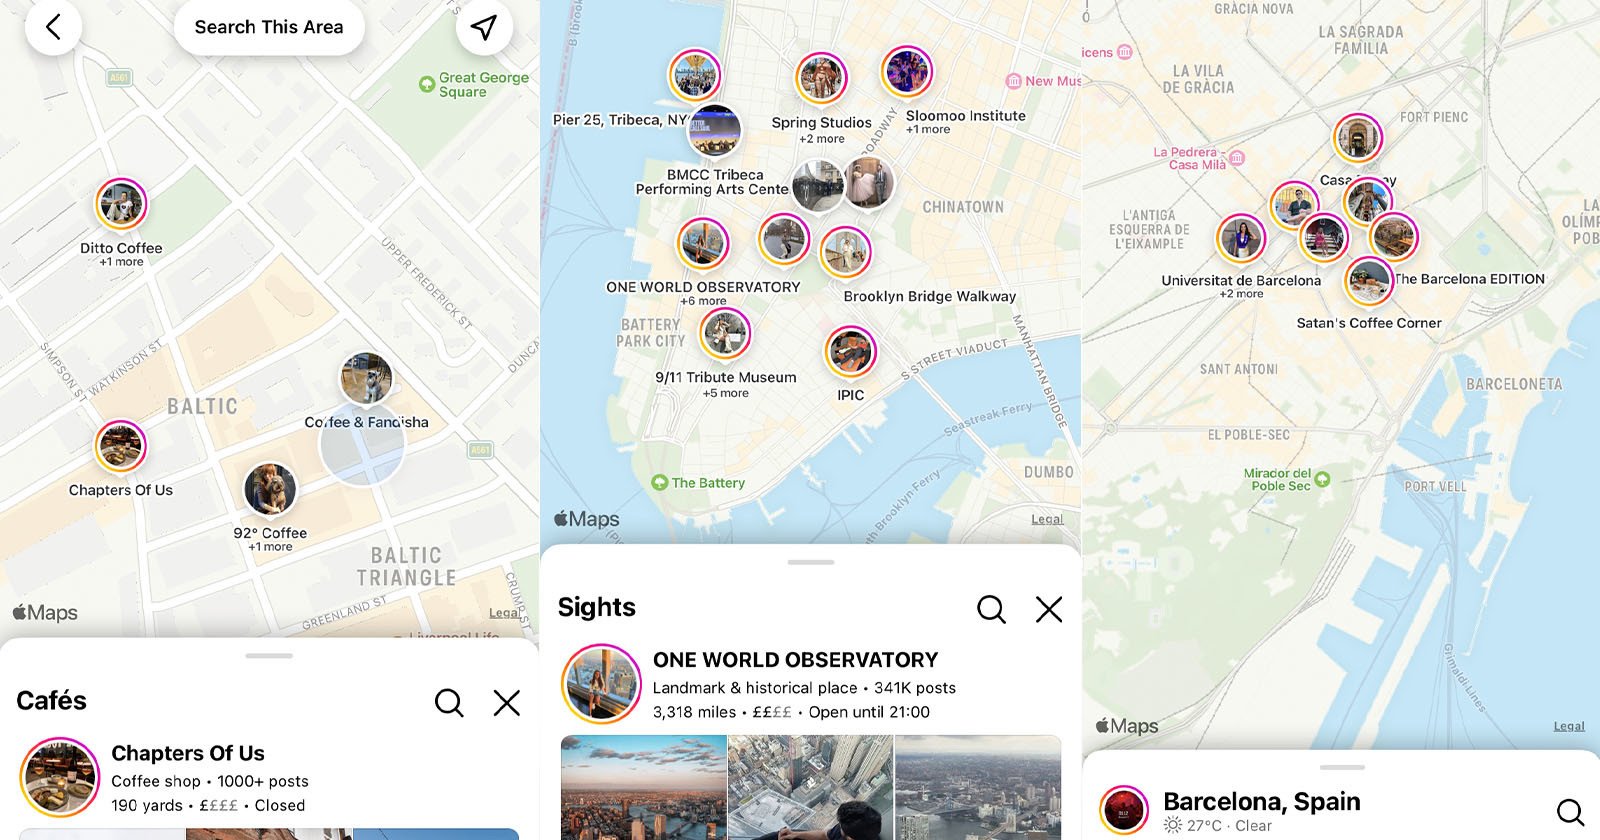  instagram upgraded maps helps discover nearby attractions 